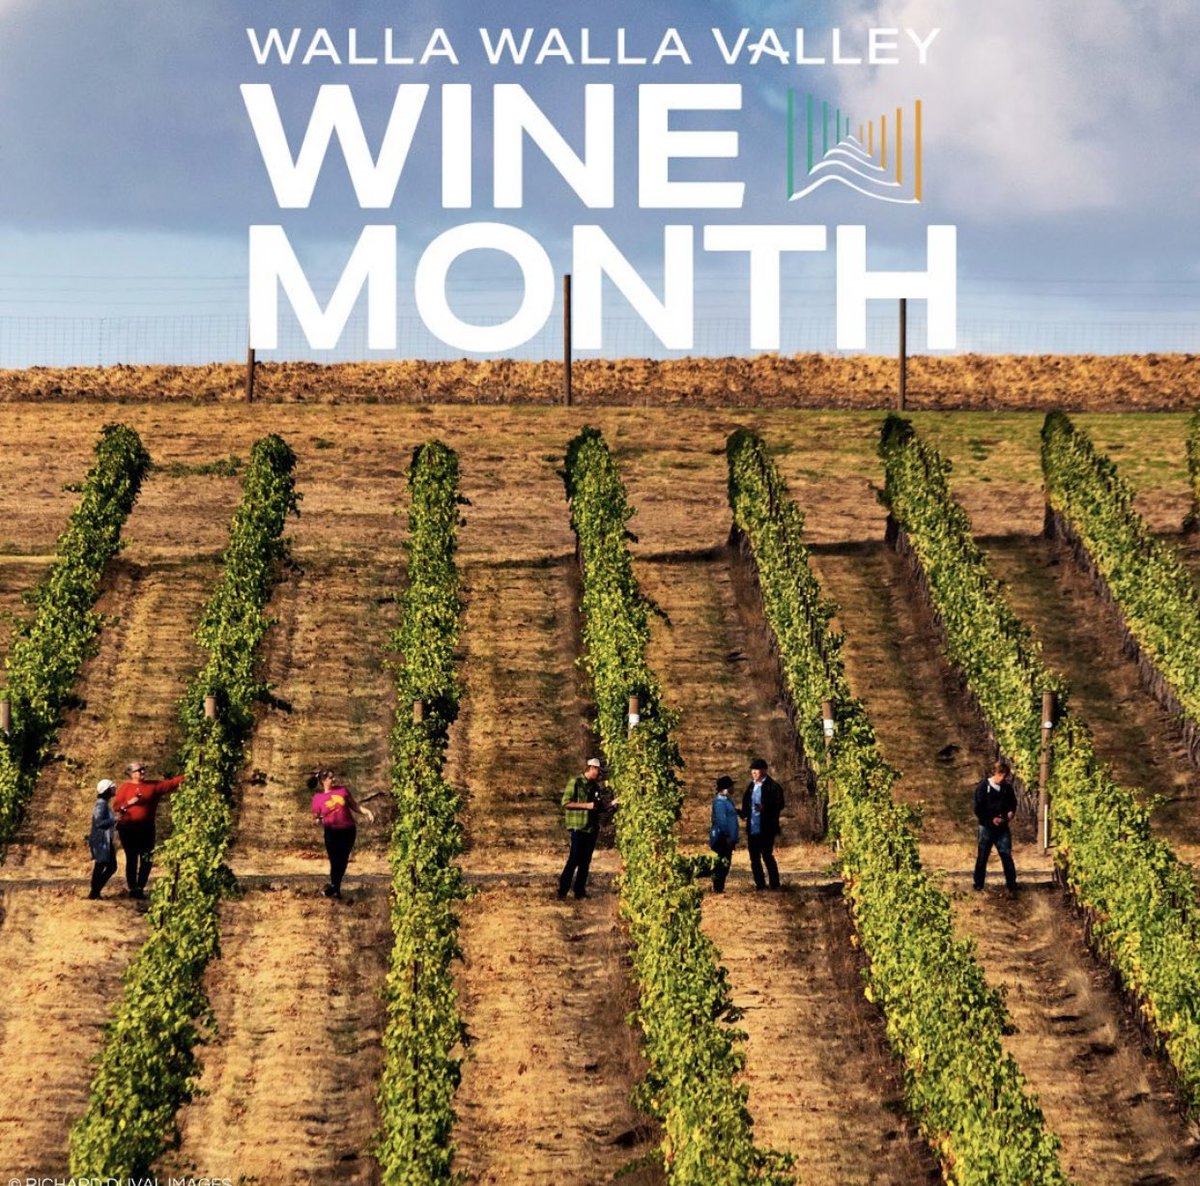 The cheers continues! April is Walla Walla Valley Wine Month! Check in with @WWValleyWine and @VisitWallaWalla to see all the deals and happenings! 🎙🎙🎙